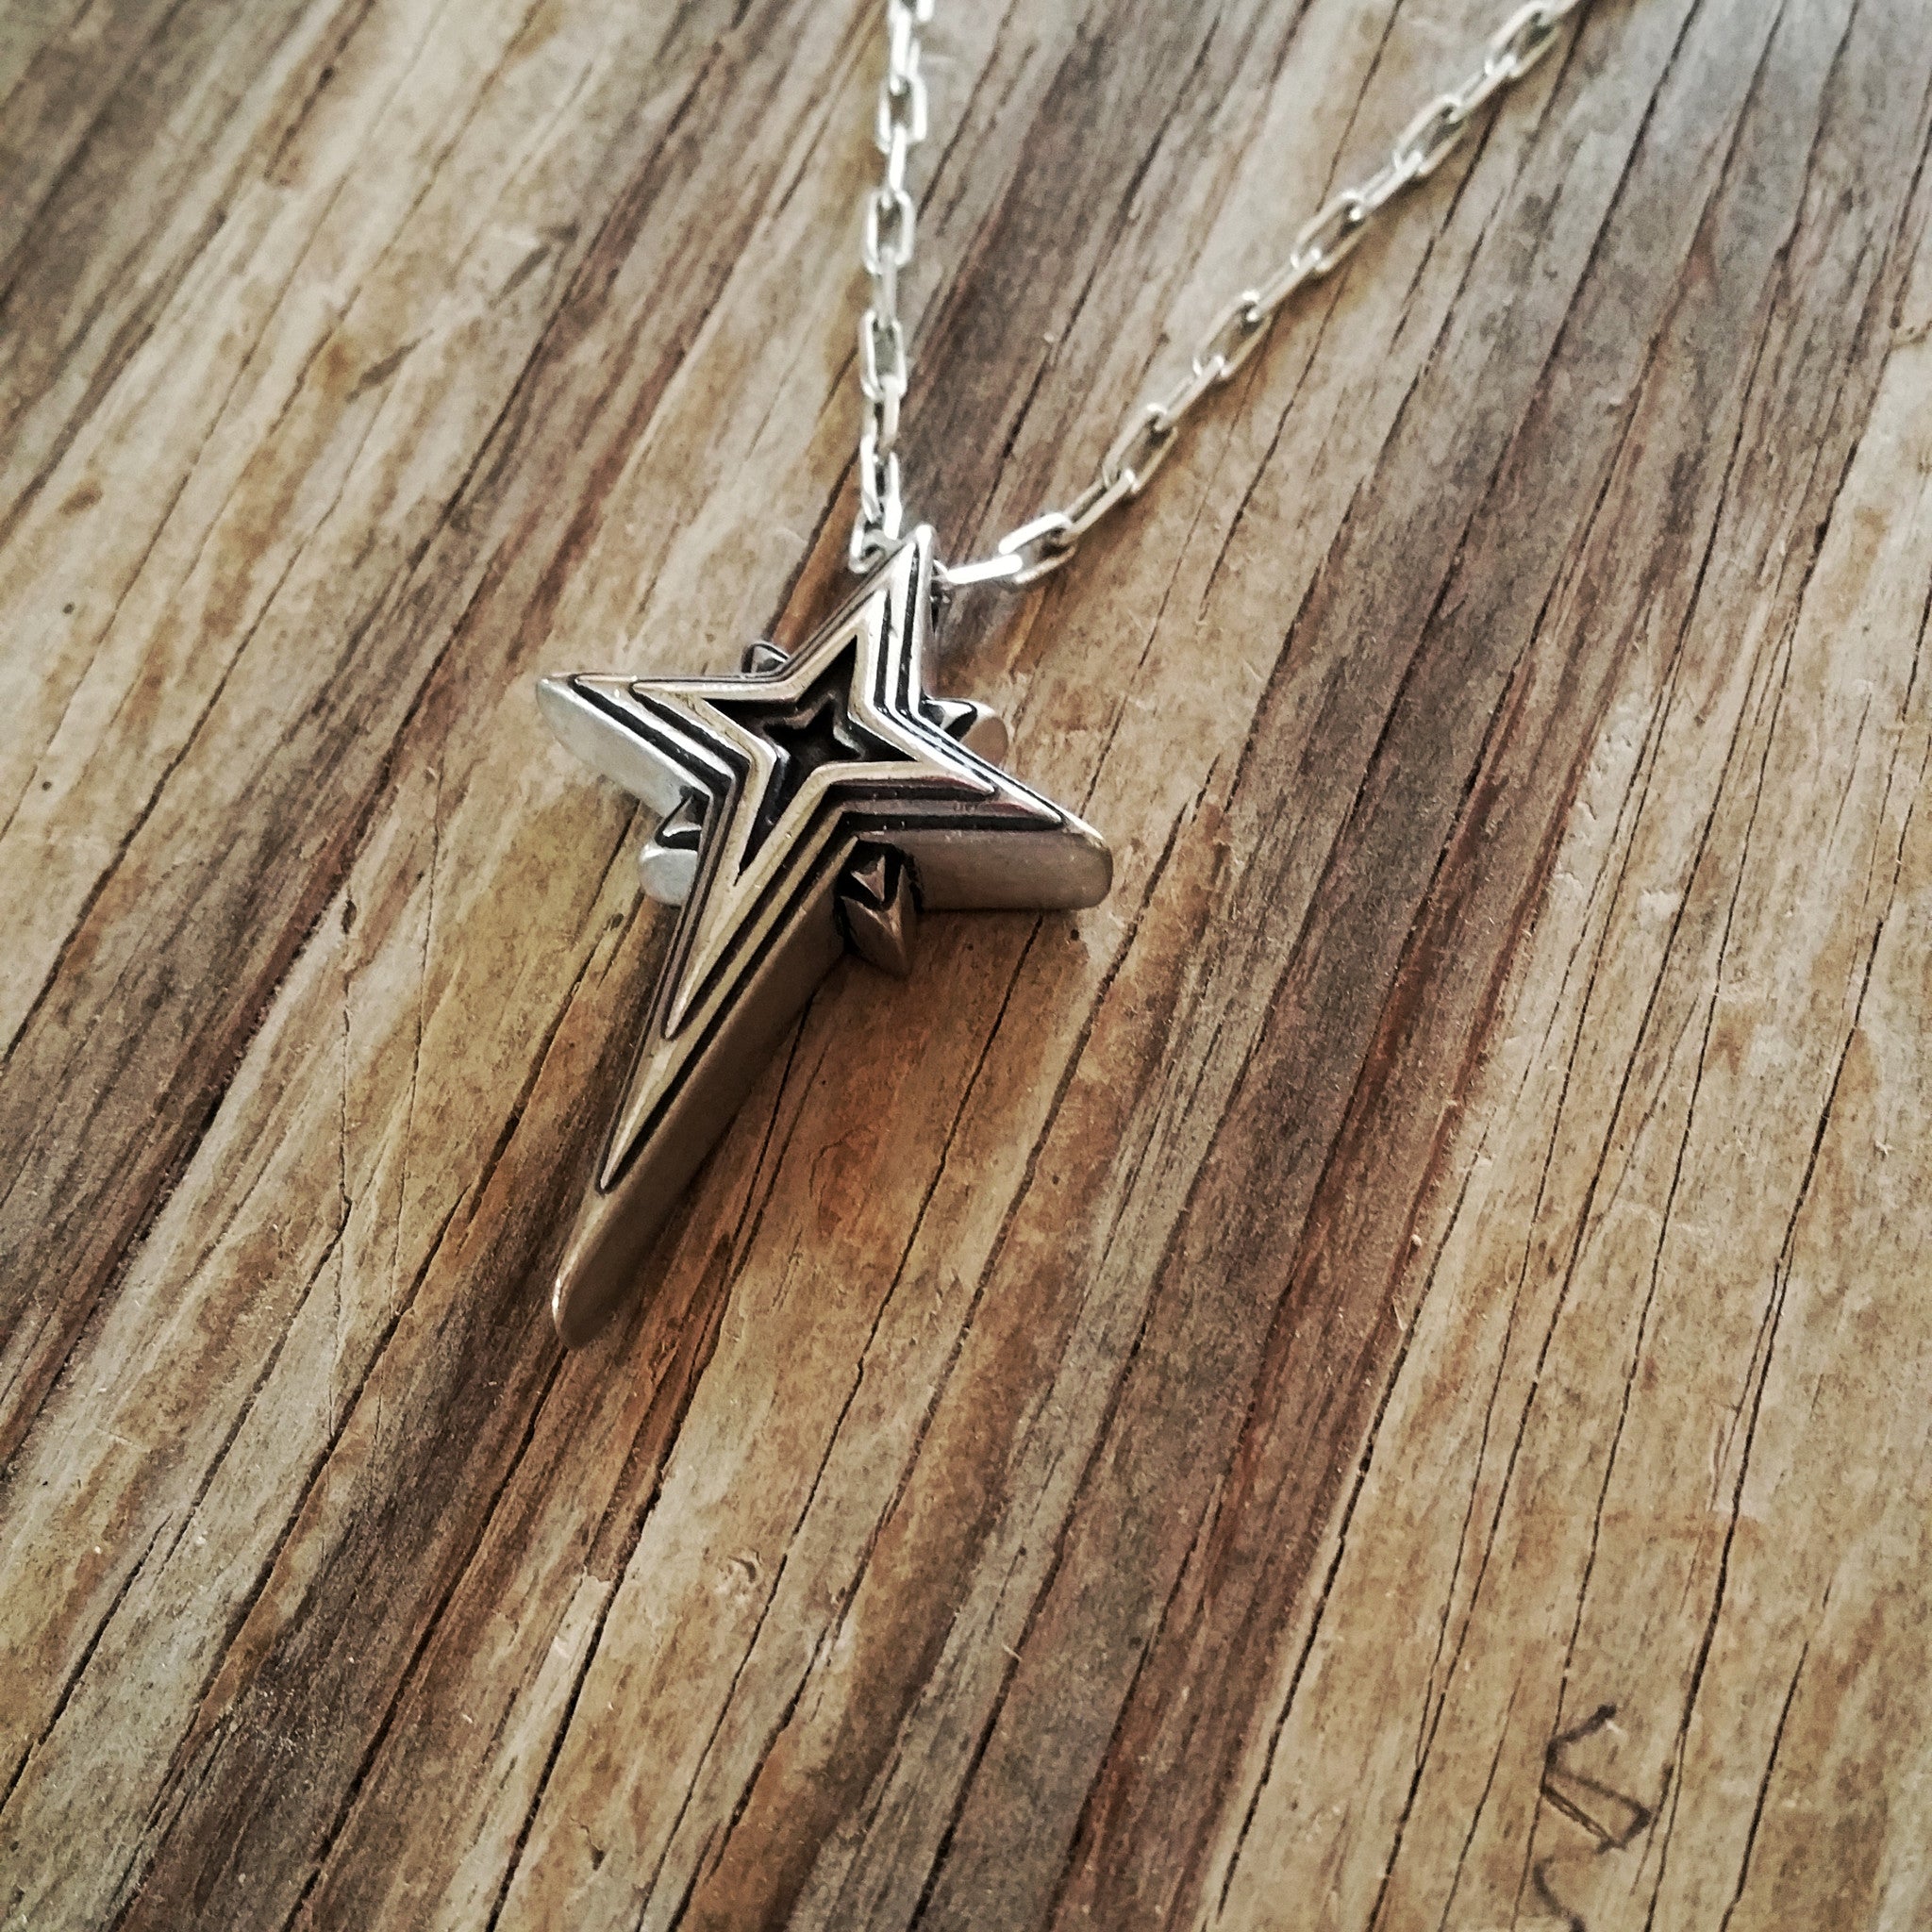 HOPE Guiding Star Necklace - Sterling Silver HONOR EMBLEM Jewelry